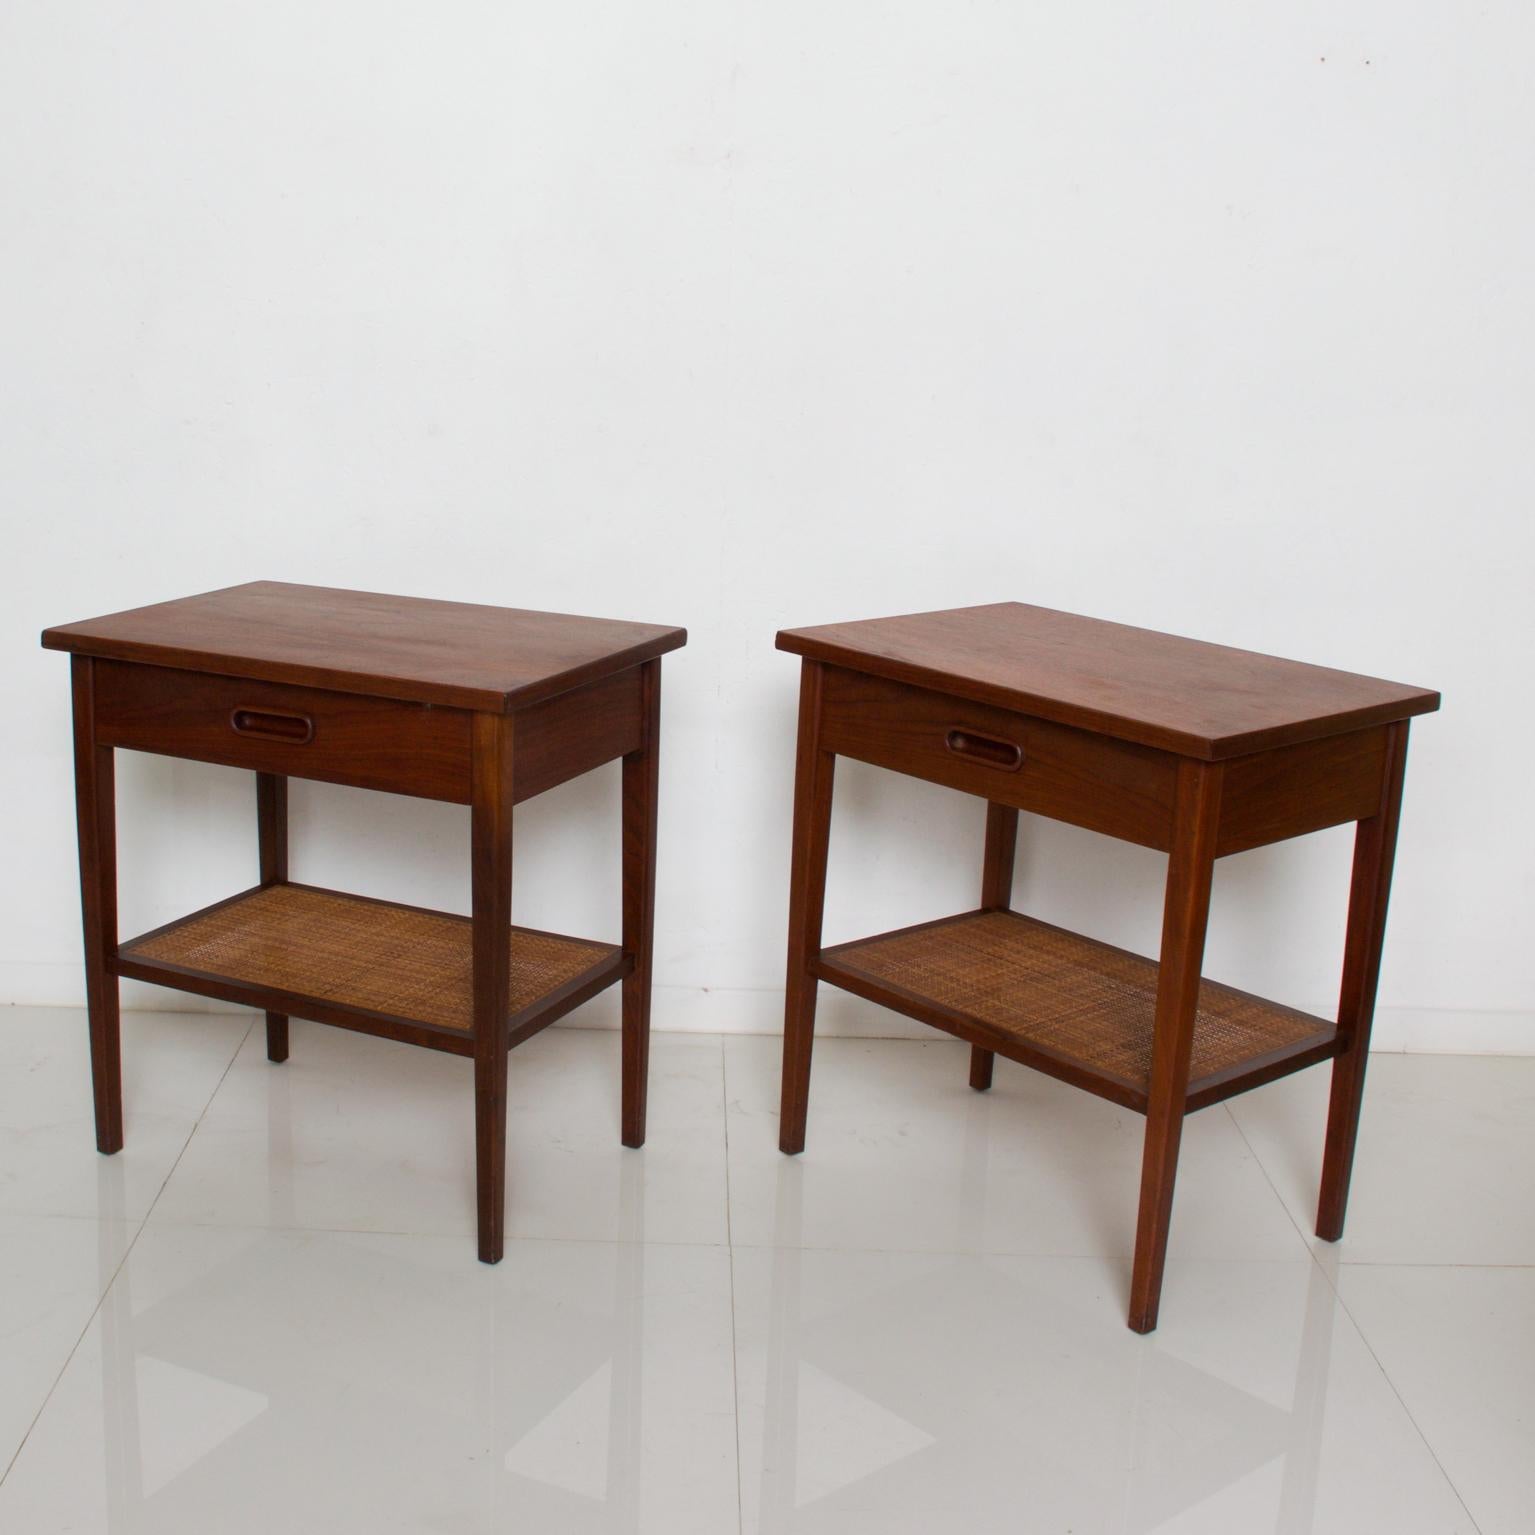 Nakashima style Mid-Century Modern walnut wood night stands side tables, 1960s, USA
Exquisite wood grain and craftsmanship.
Simplicity defined. Lower ledge in cane weave. Double dovetail joinery. No signature present.
Dimensions: 23 3/4